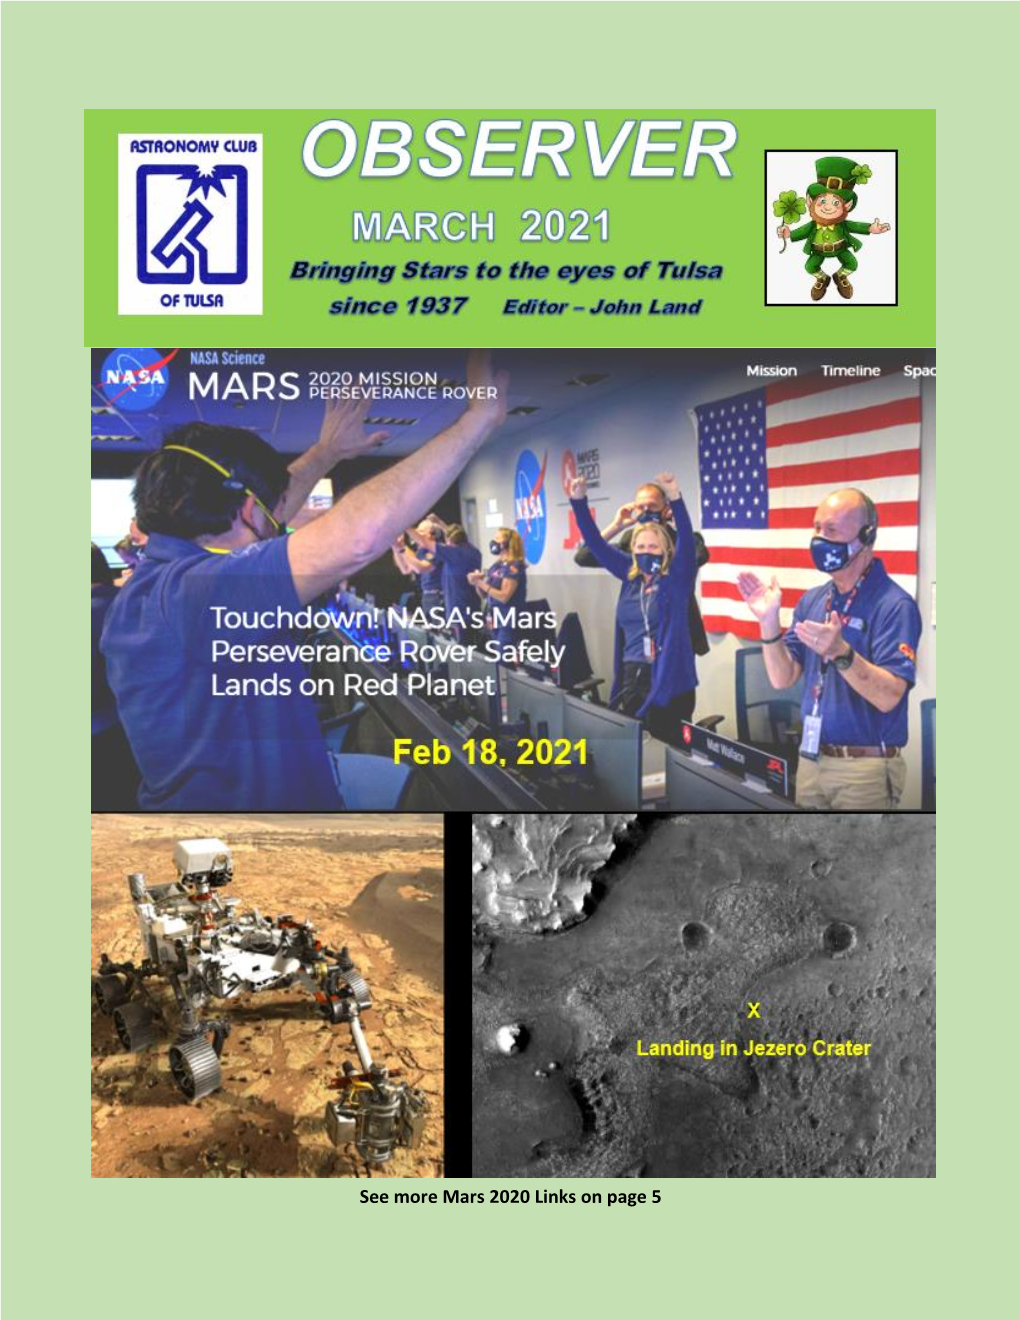 See More Mars 2020 Links on Page 5